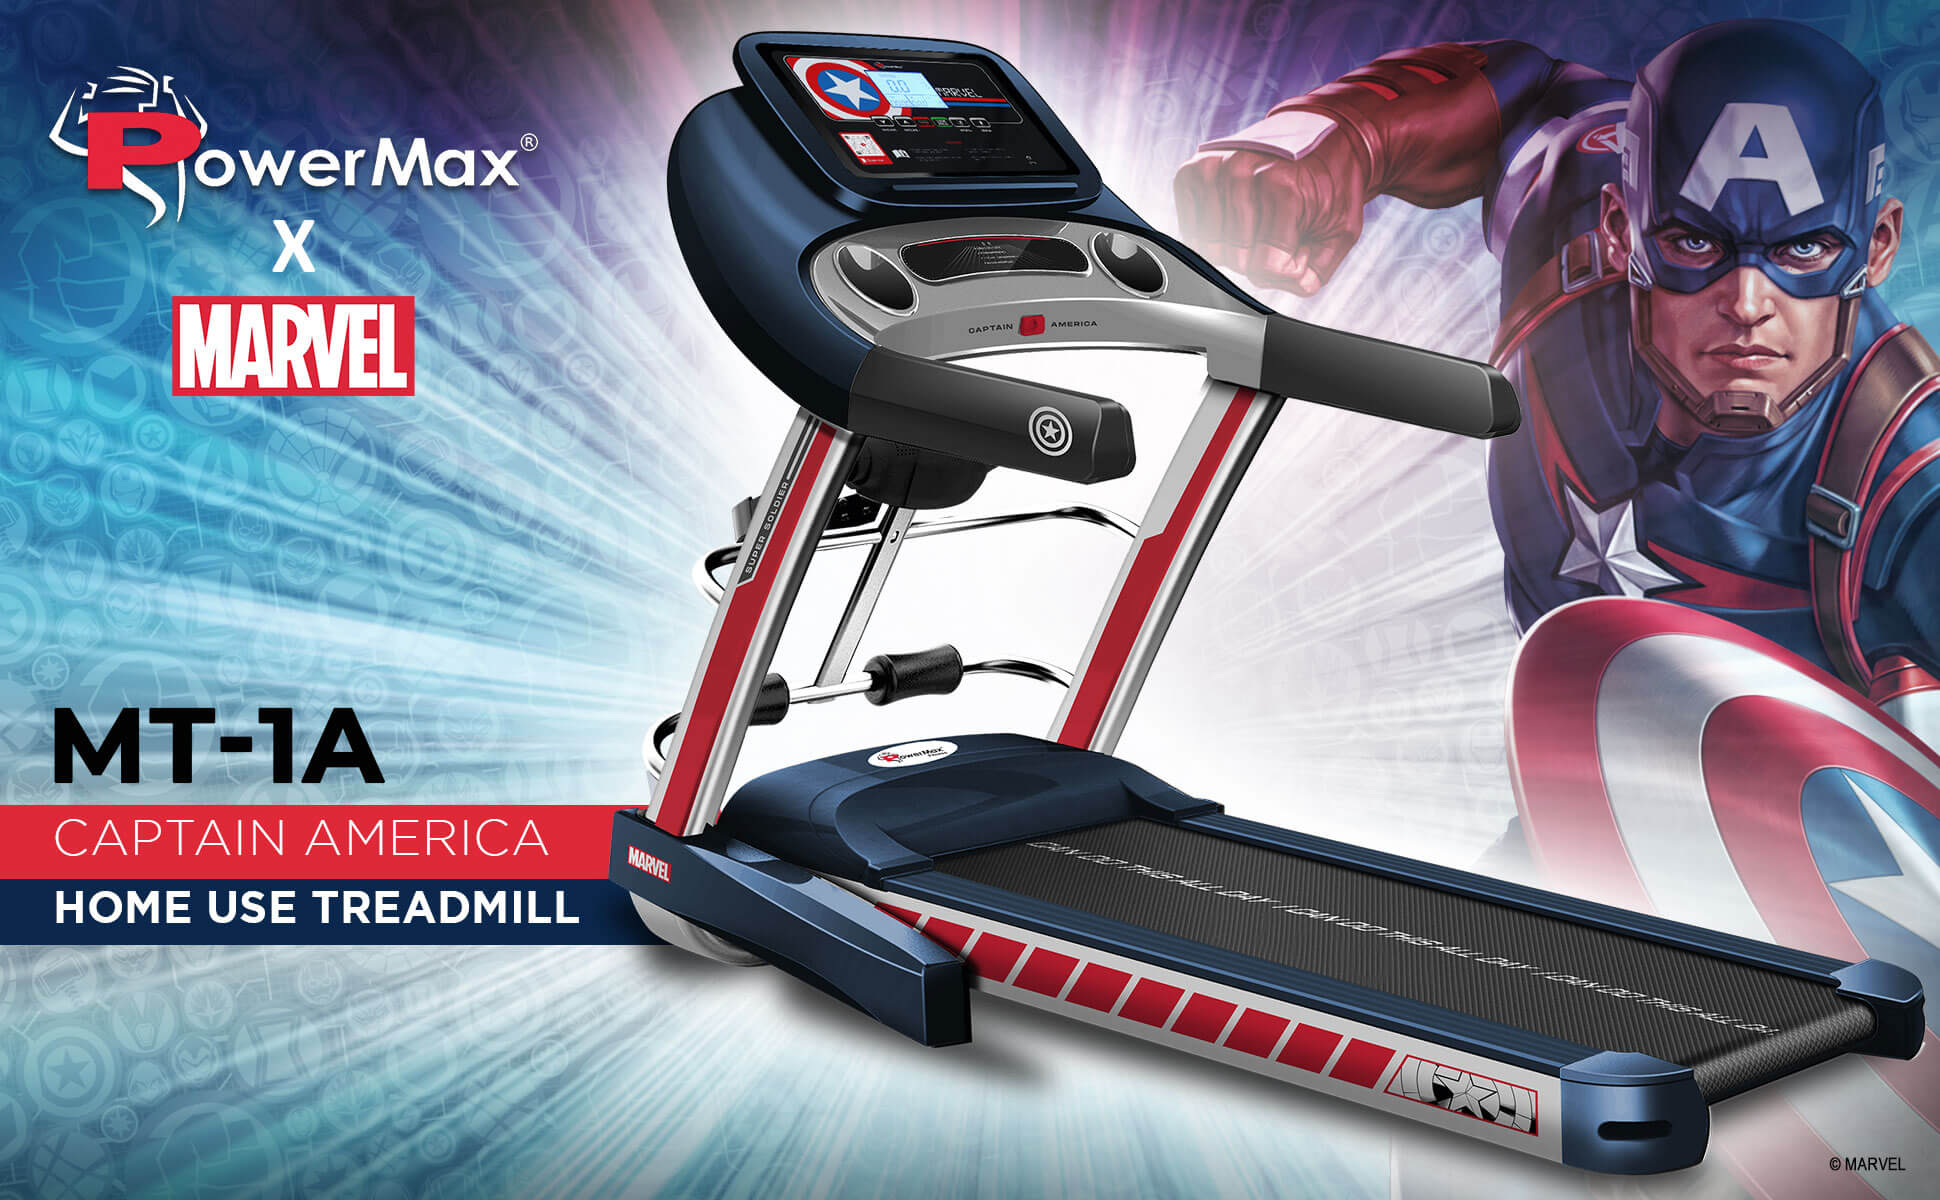 buy powermax x marvel mt-1a motorized treadmill with android & ios application